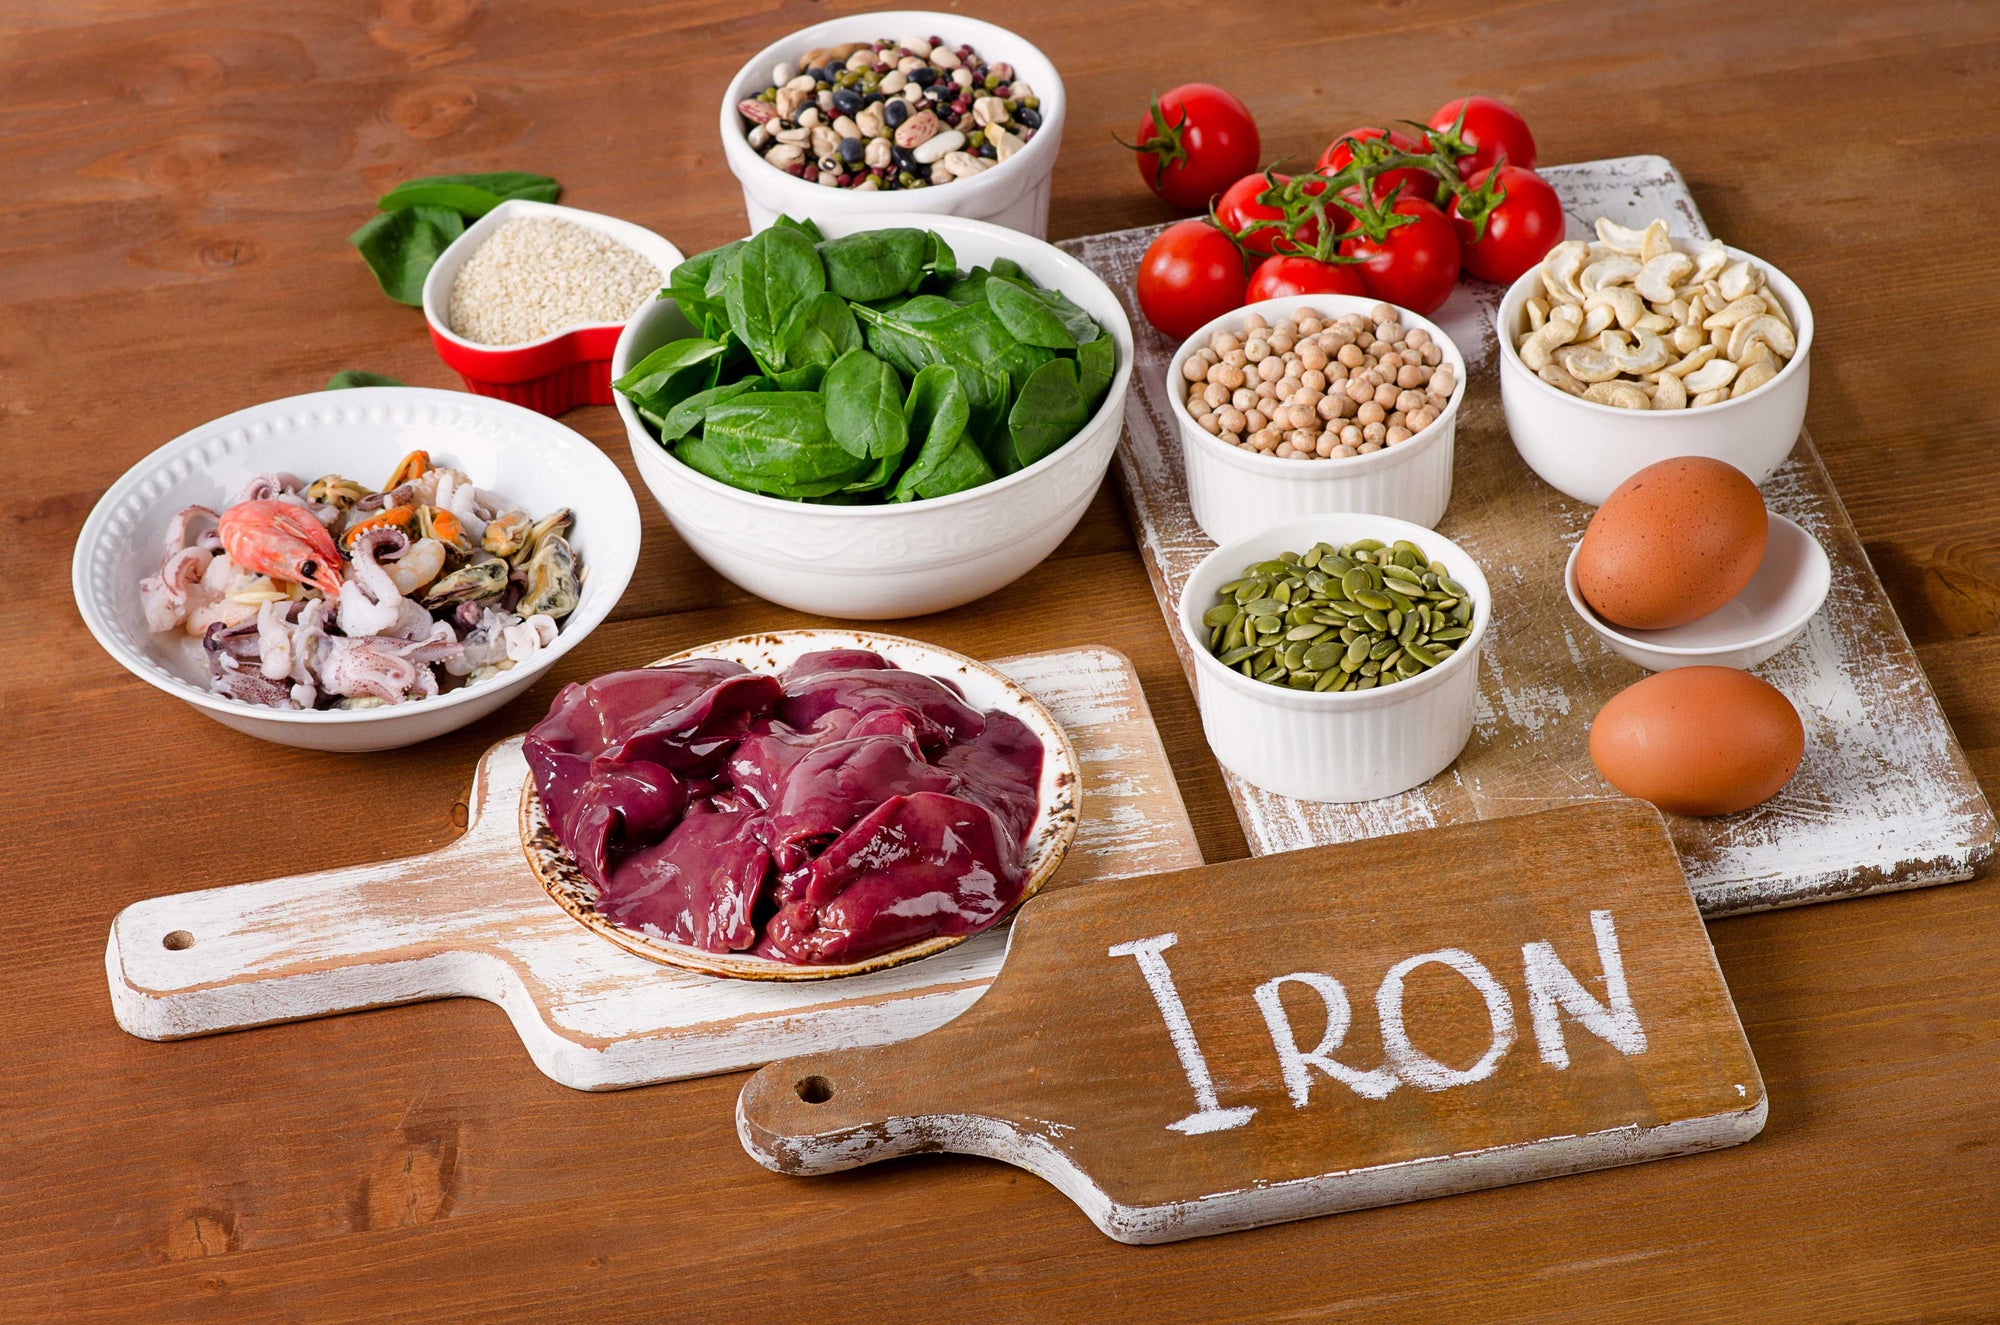 How Iron Benefits Your Health